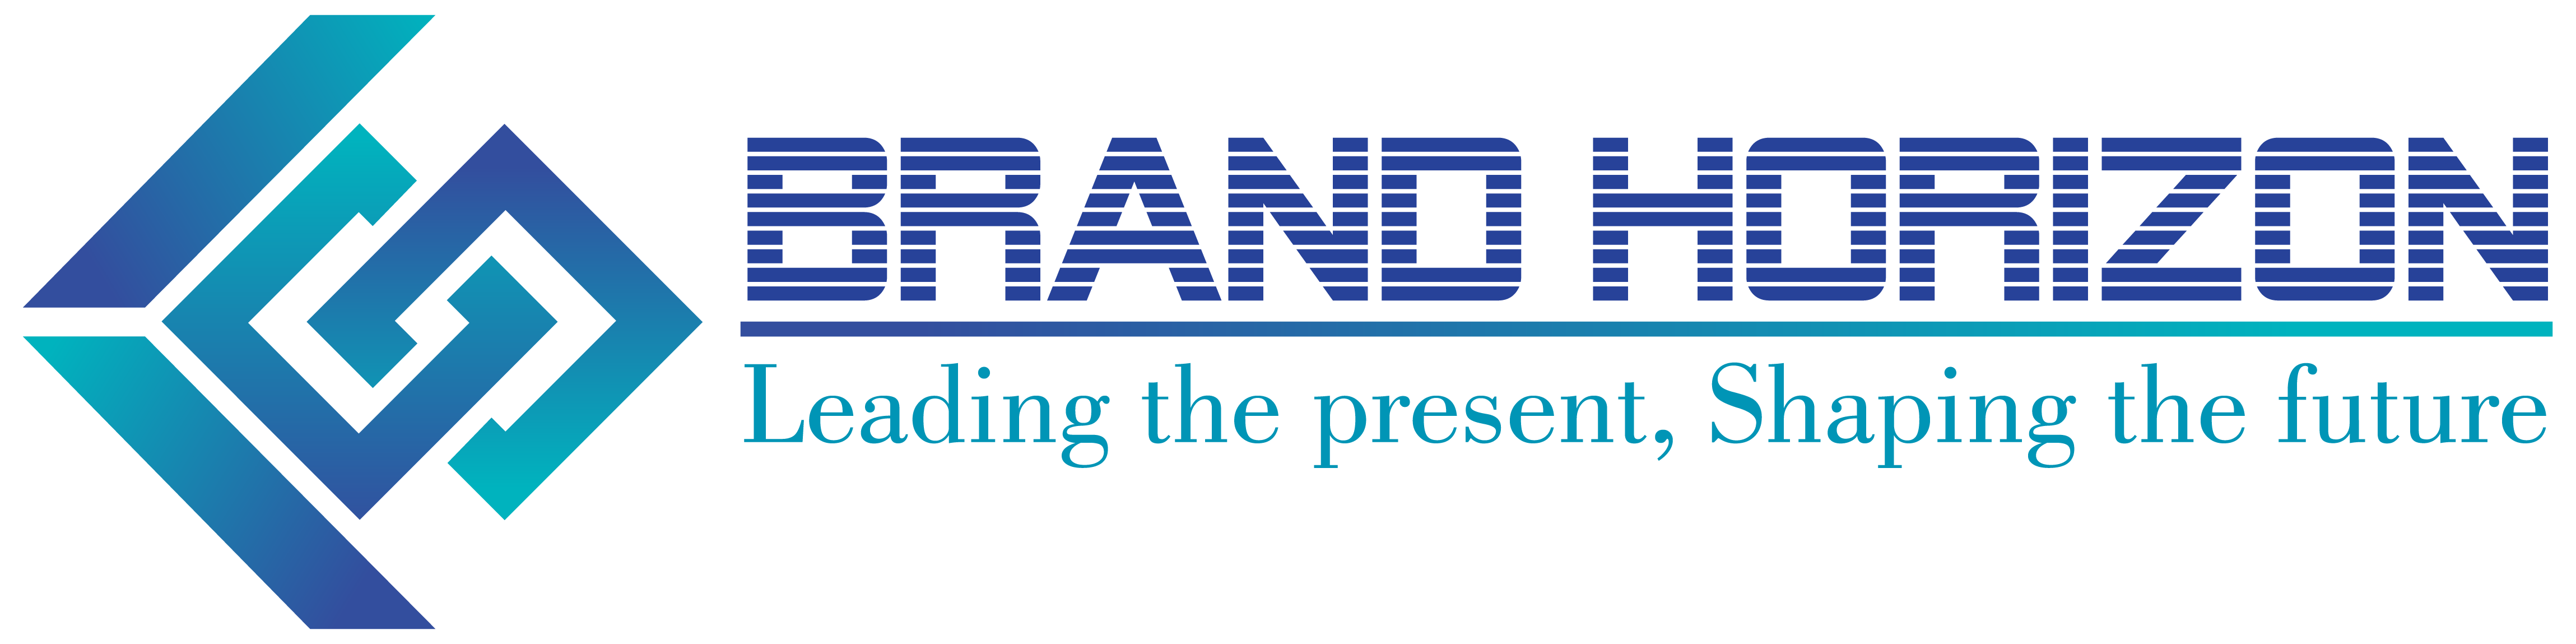 Brand Strategy consulting firms in India